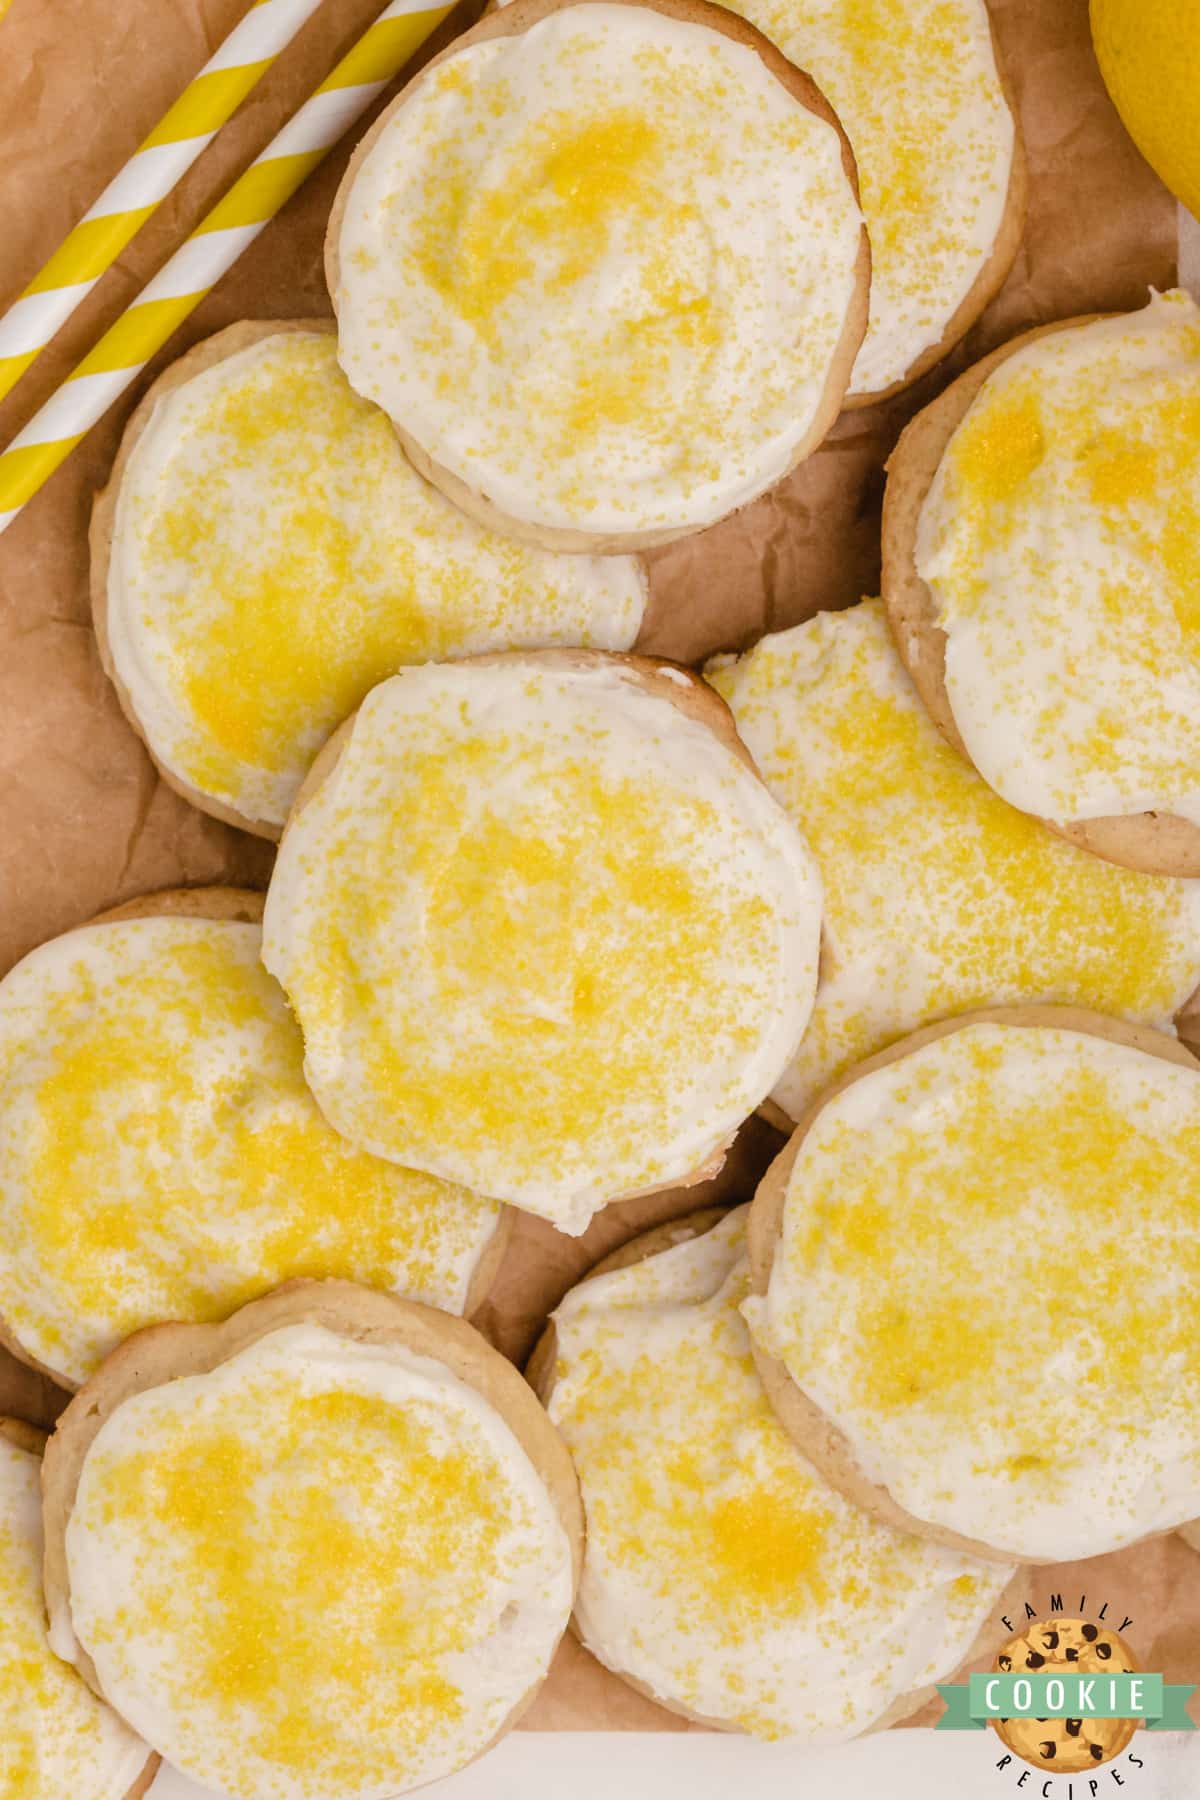 Frosted lemon cookies made with lemonade concentrate